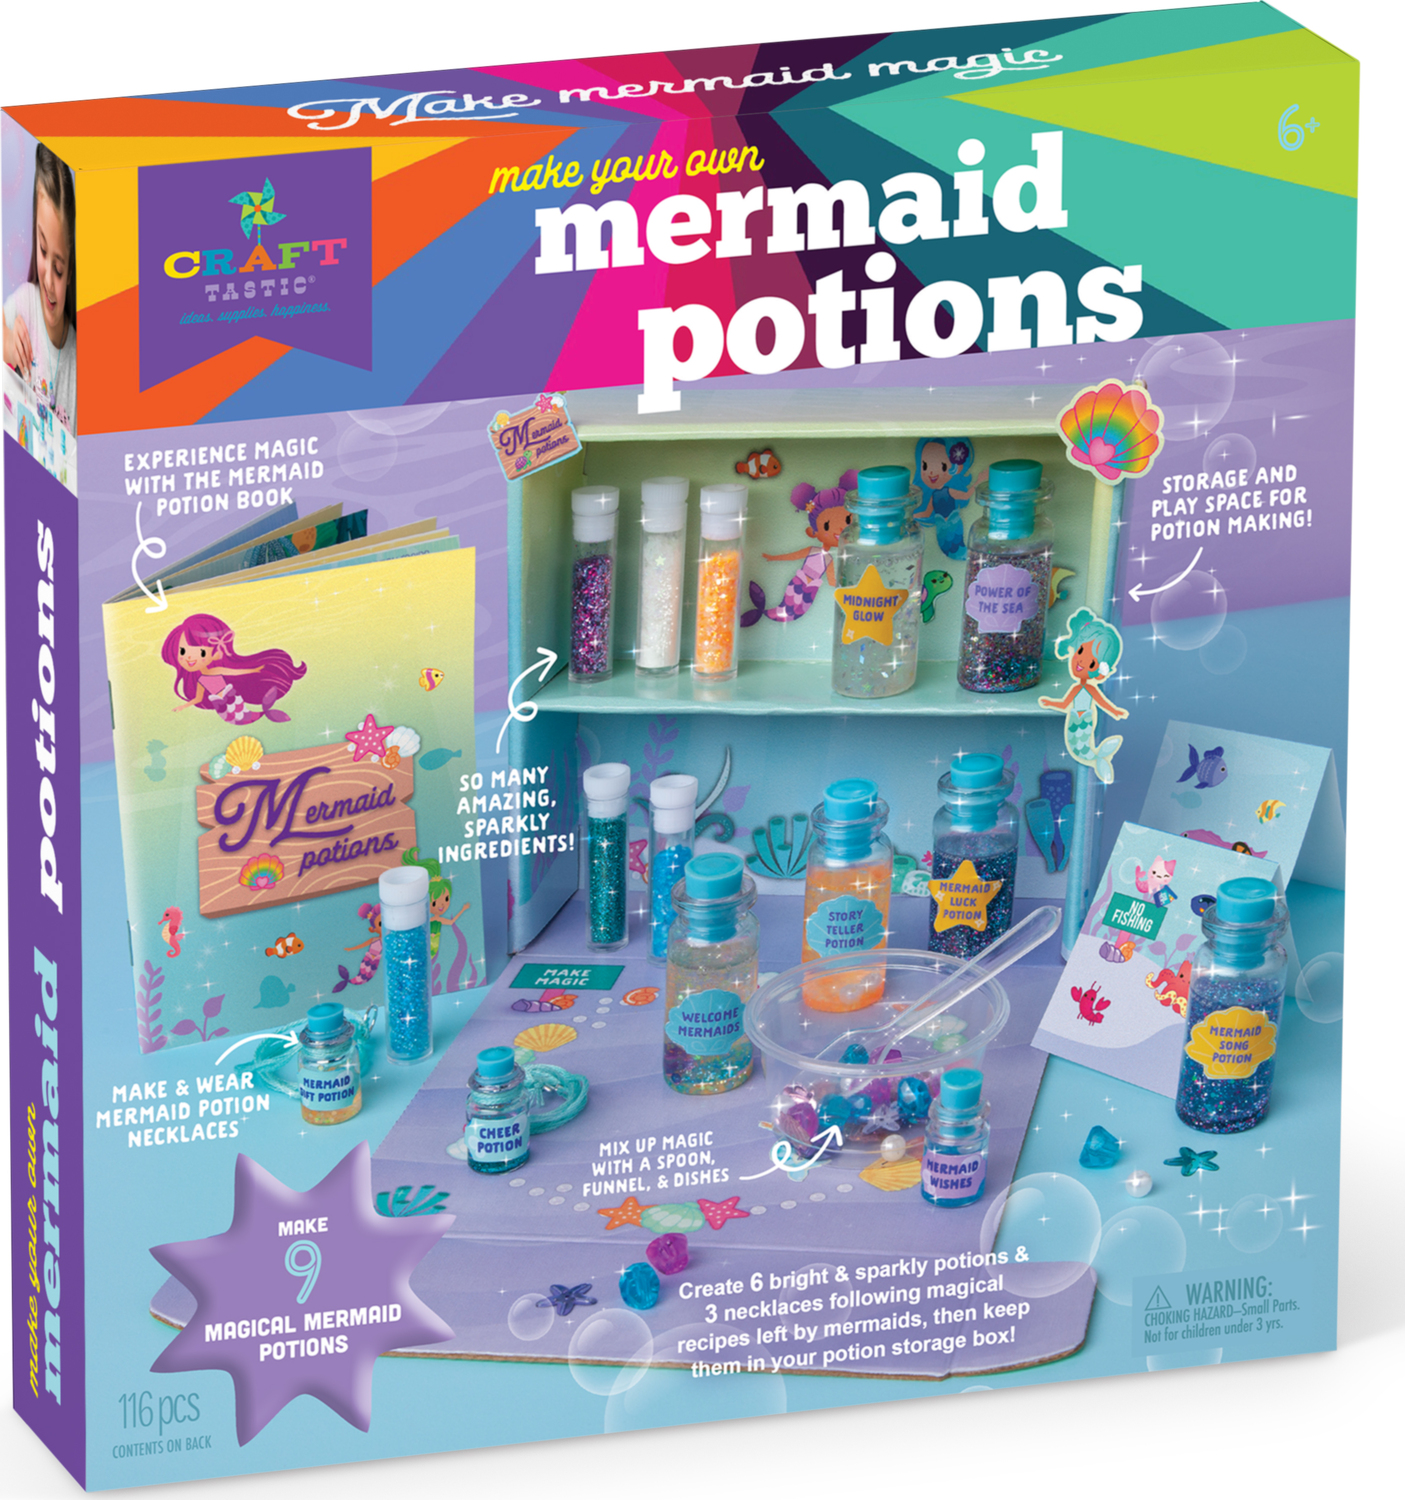 DIY Fairy Potions Kit for Kids - Make Your Own Fairy Potions Arts & Crafts  Set - Great Gift for Kits 5 6 7 8 9 10 Years and Up (Fairy)